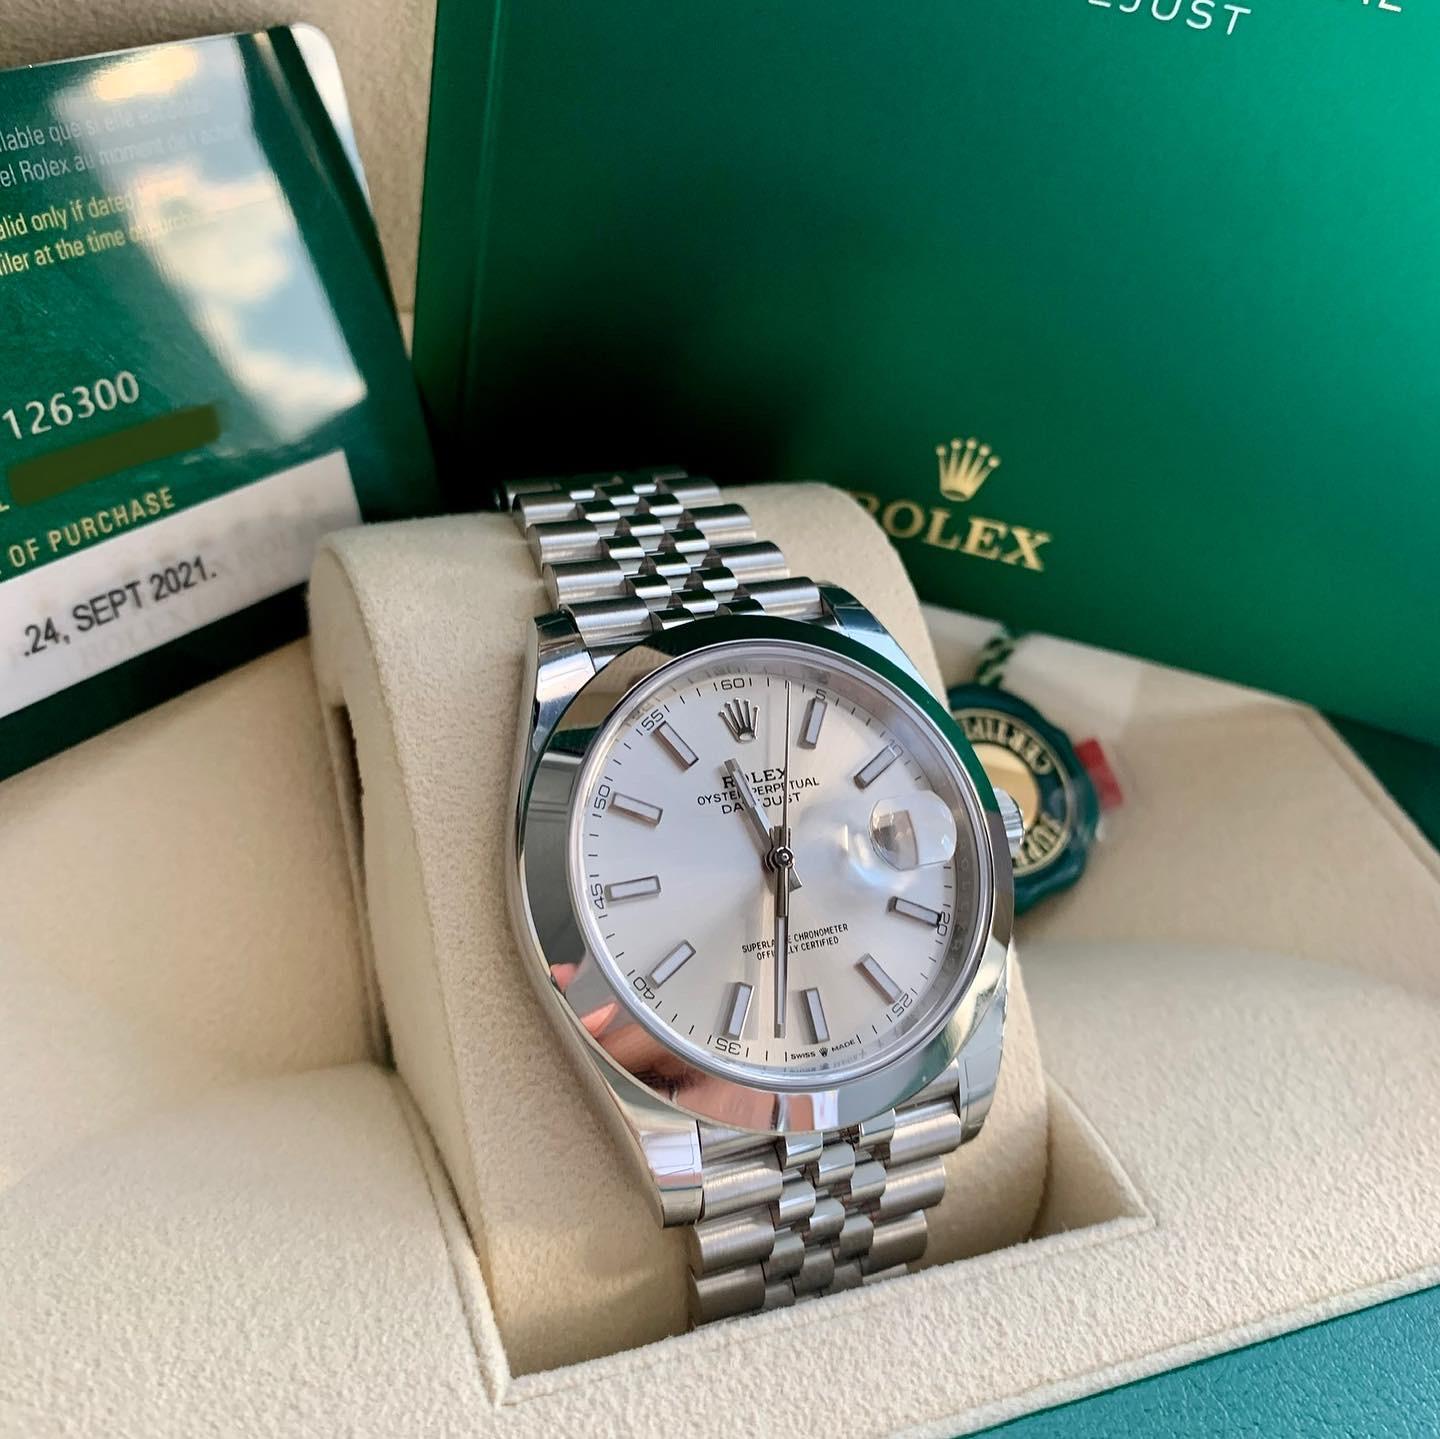 Warranty Card Dated 2021 
**Please Note** The serial numbers have been blurred in the photos, for security & privacy. However, they are fully present. Cashing Diamonds has been involved in the luxury watch trade for over 10 Years, located in Orange